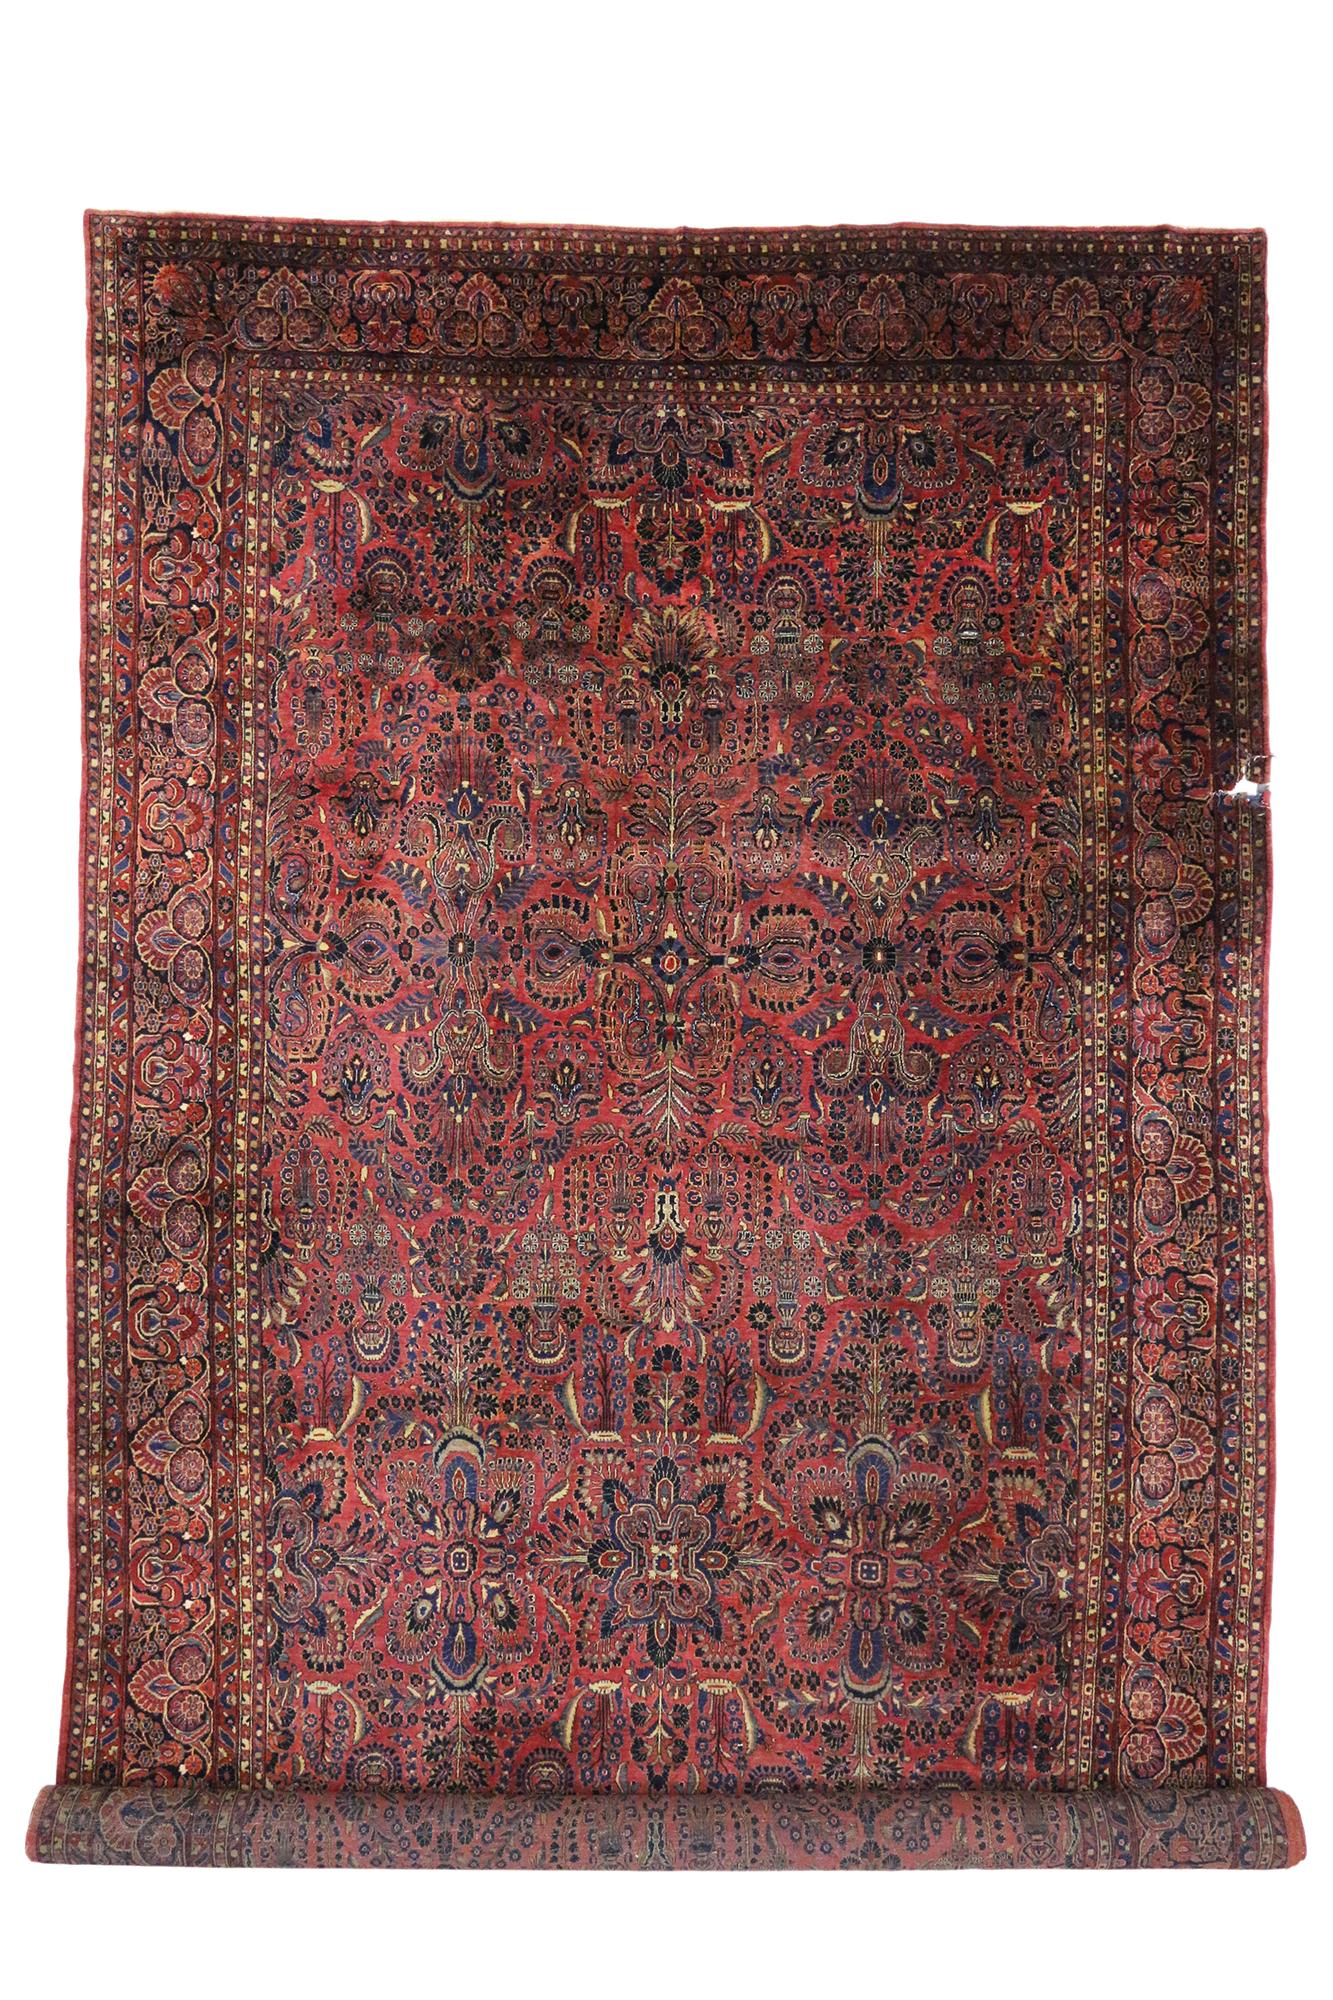 Oversized Antique Persian Sarouk Rug Hotel Lobby Size Carpet In Good Condition For Sale In Dallas, TX